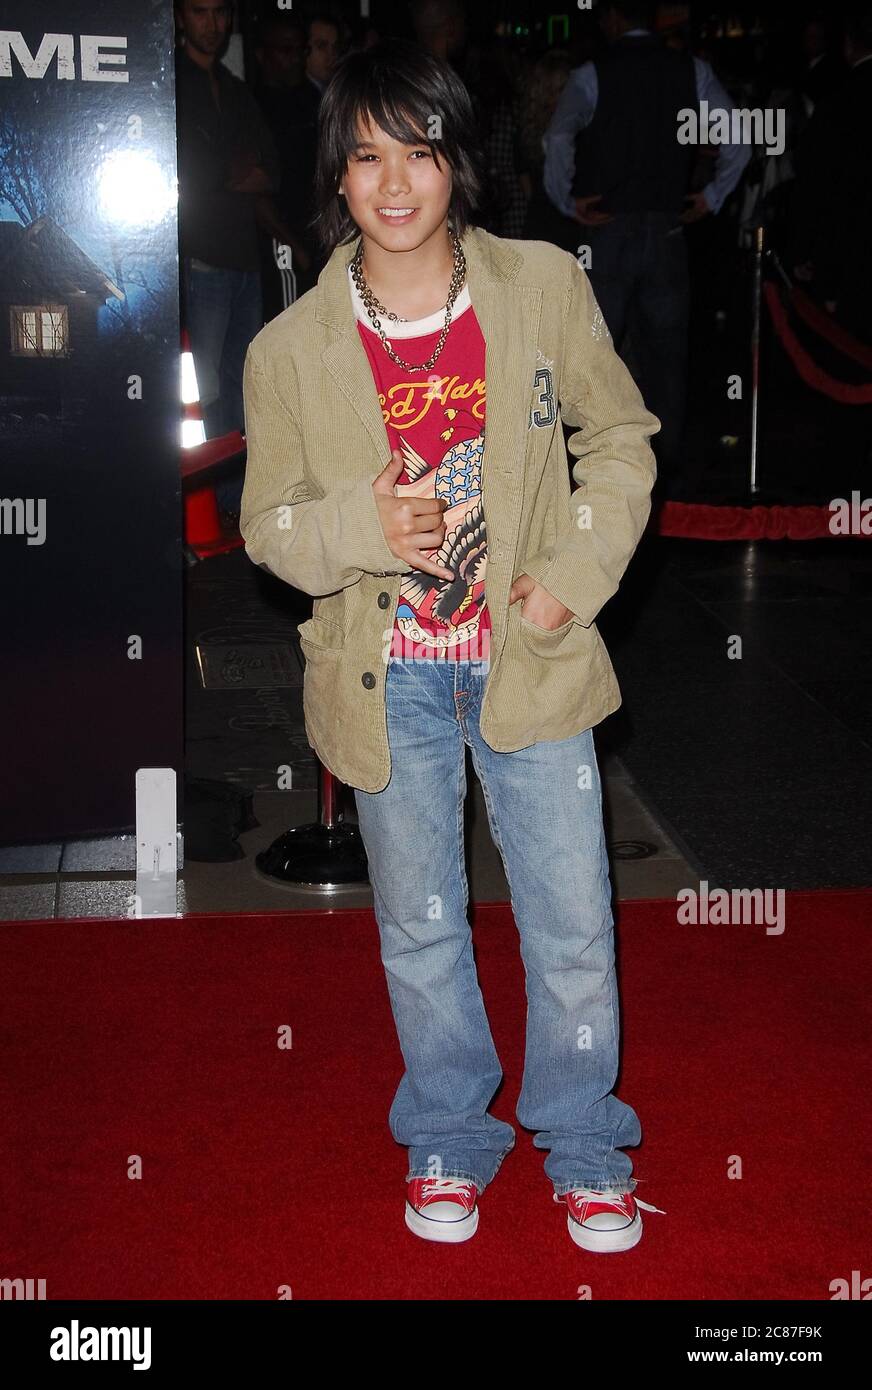 Boo Boo Stewart at the Premiere of 'Somebody Help Me' held at the Grauman's Chinese Theater in Hollywood, CA. The event took place on Thursday, October25, 2007. Photo by: SBM / PictureLux- File Reference # 34006-9807SBMPLX Stock Photo